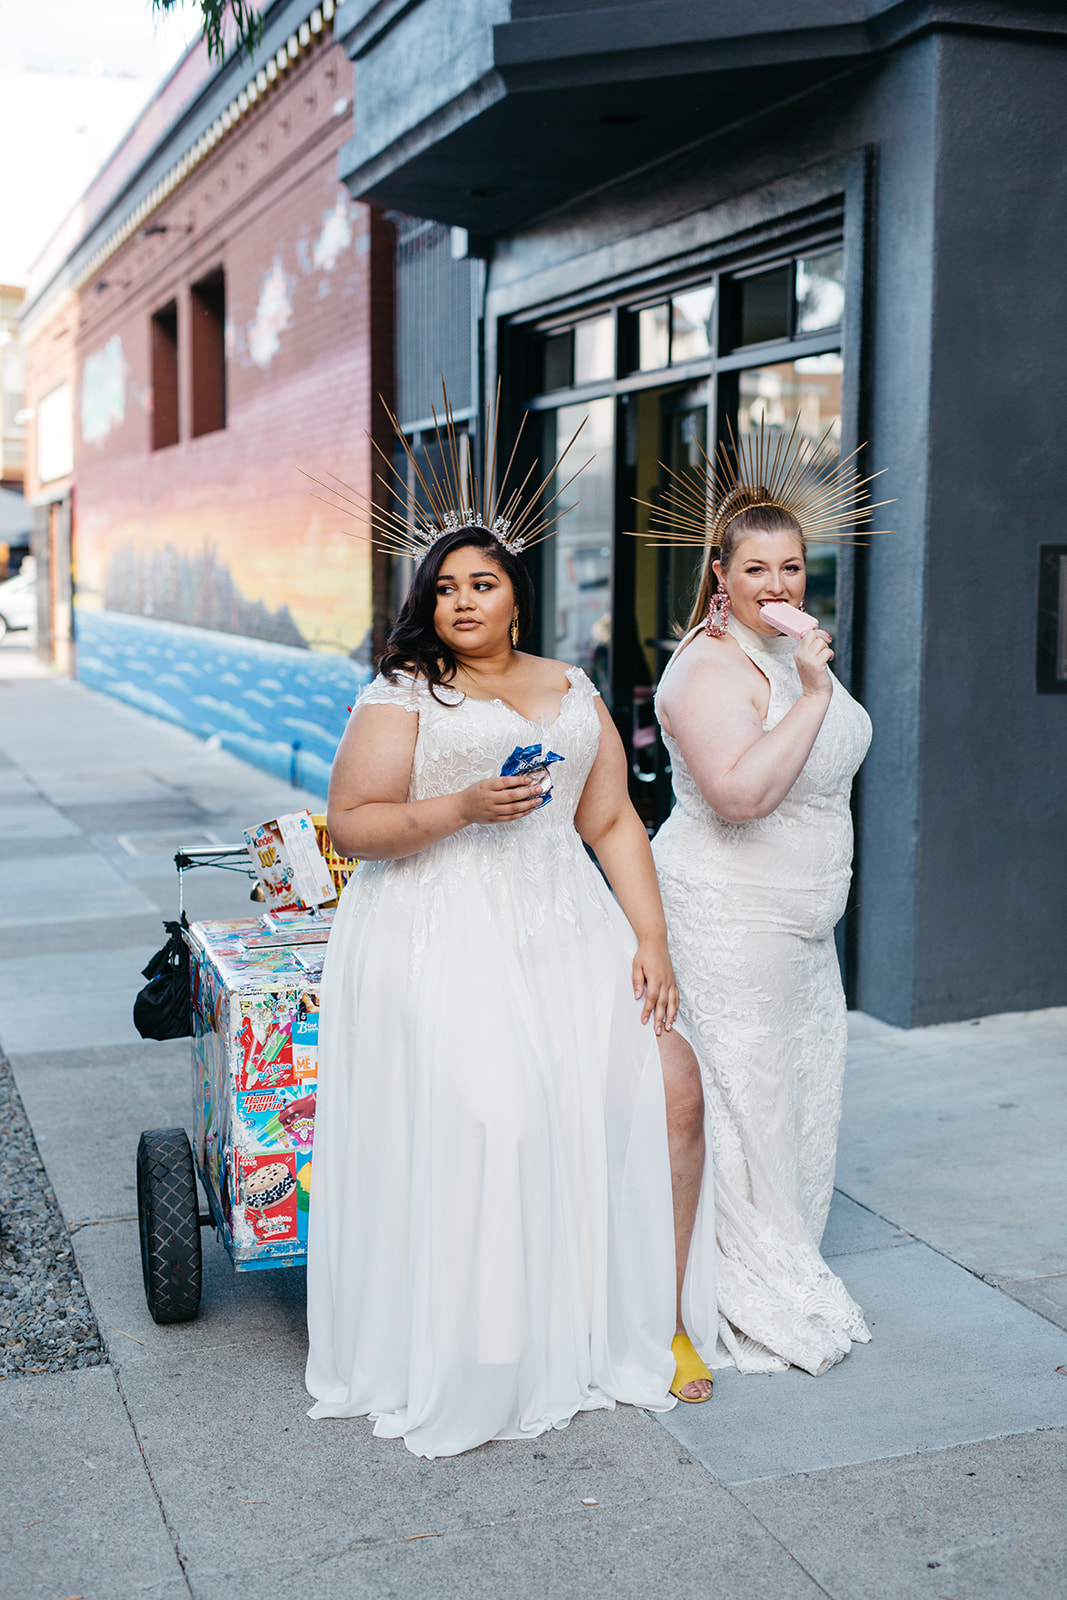 plus size models wearing bohemian plus size wedding dresses from the a practical wedding plus size wedding dress collection sitting on an ice cream cart in san francisco 